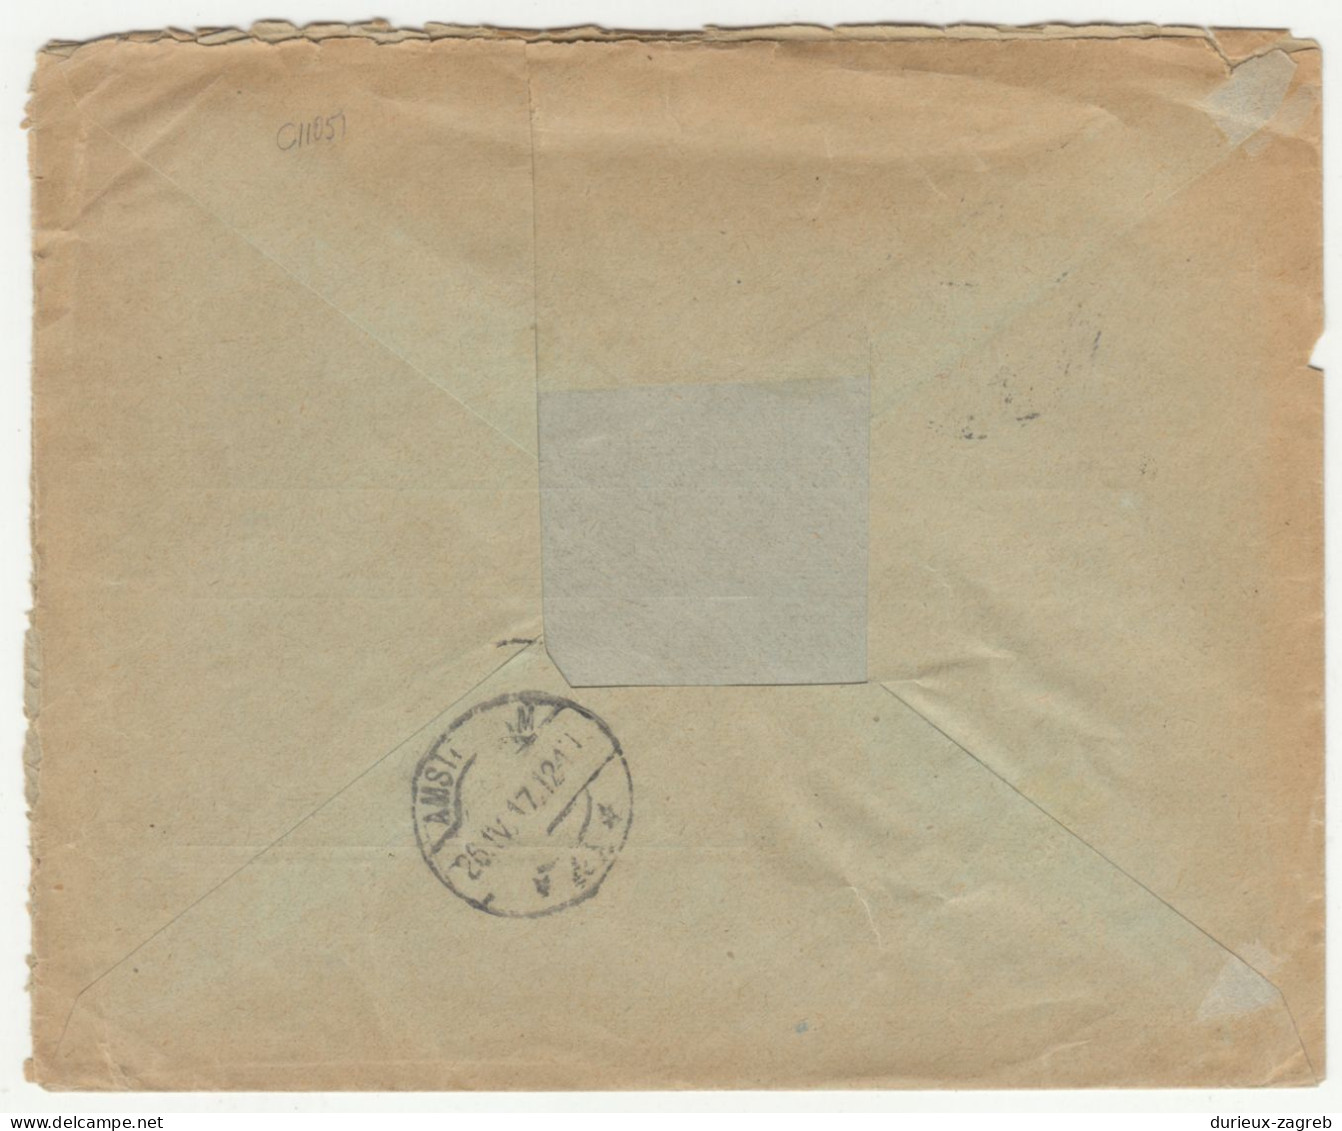 Emeente Zaandam Letter Cover Posted Registered 1917 B240503 - Covers & Documents